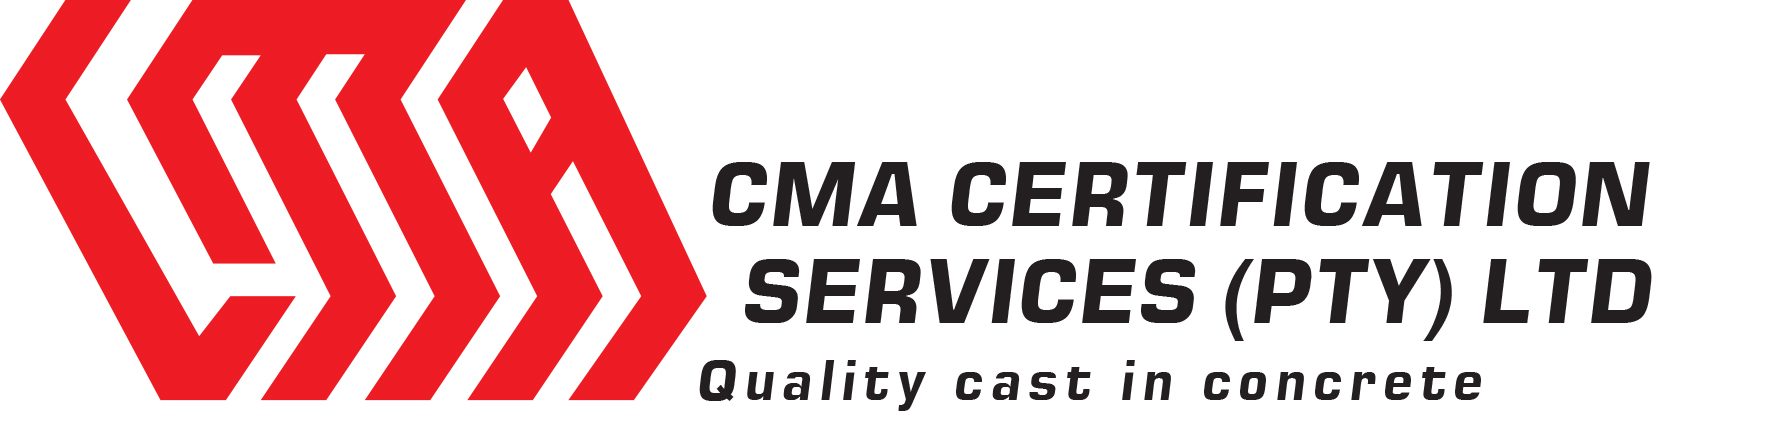 certification_services_logo